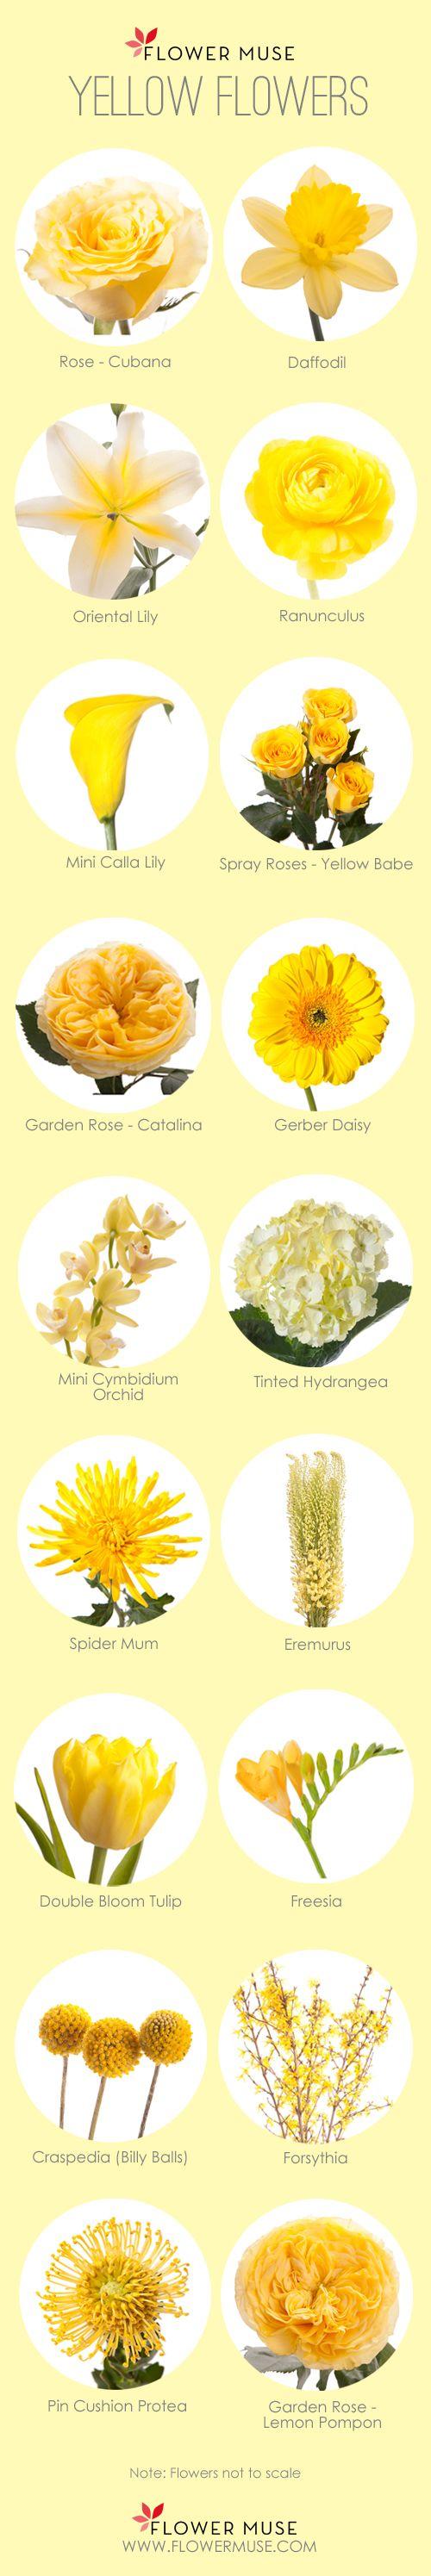 Mariage - Our Favorite: Yellow Flowers - Flower Muse Blog